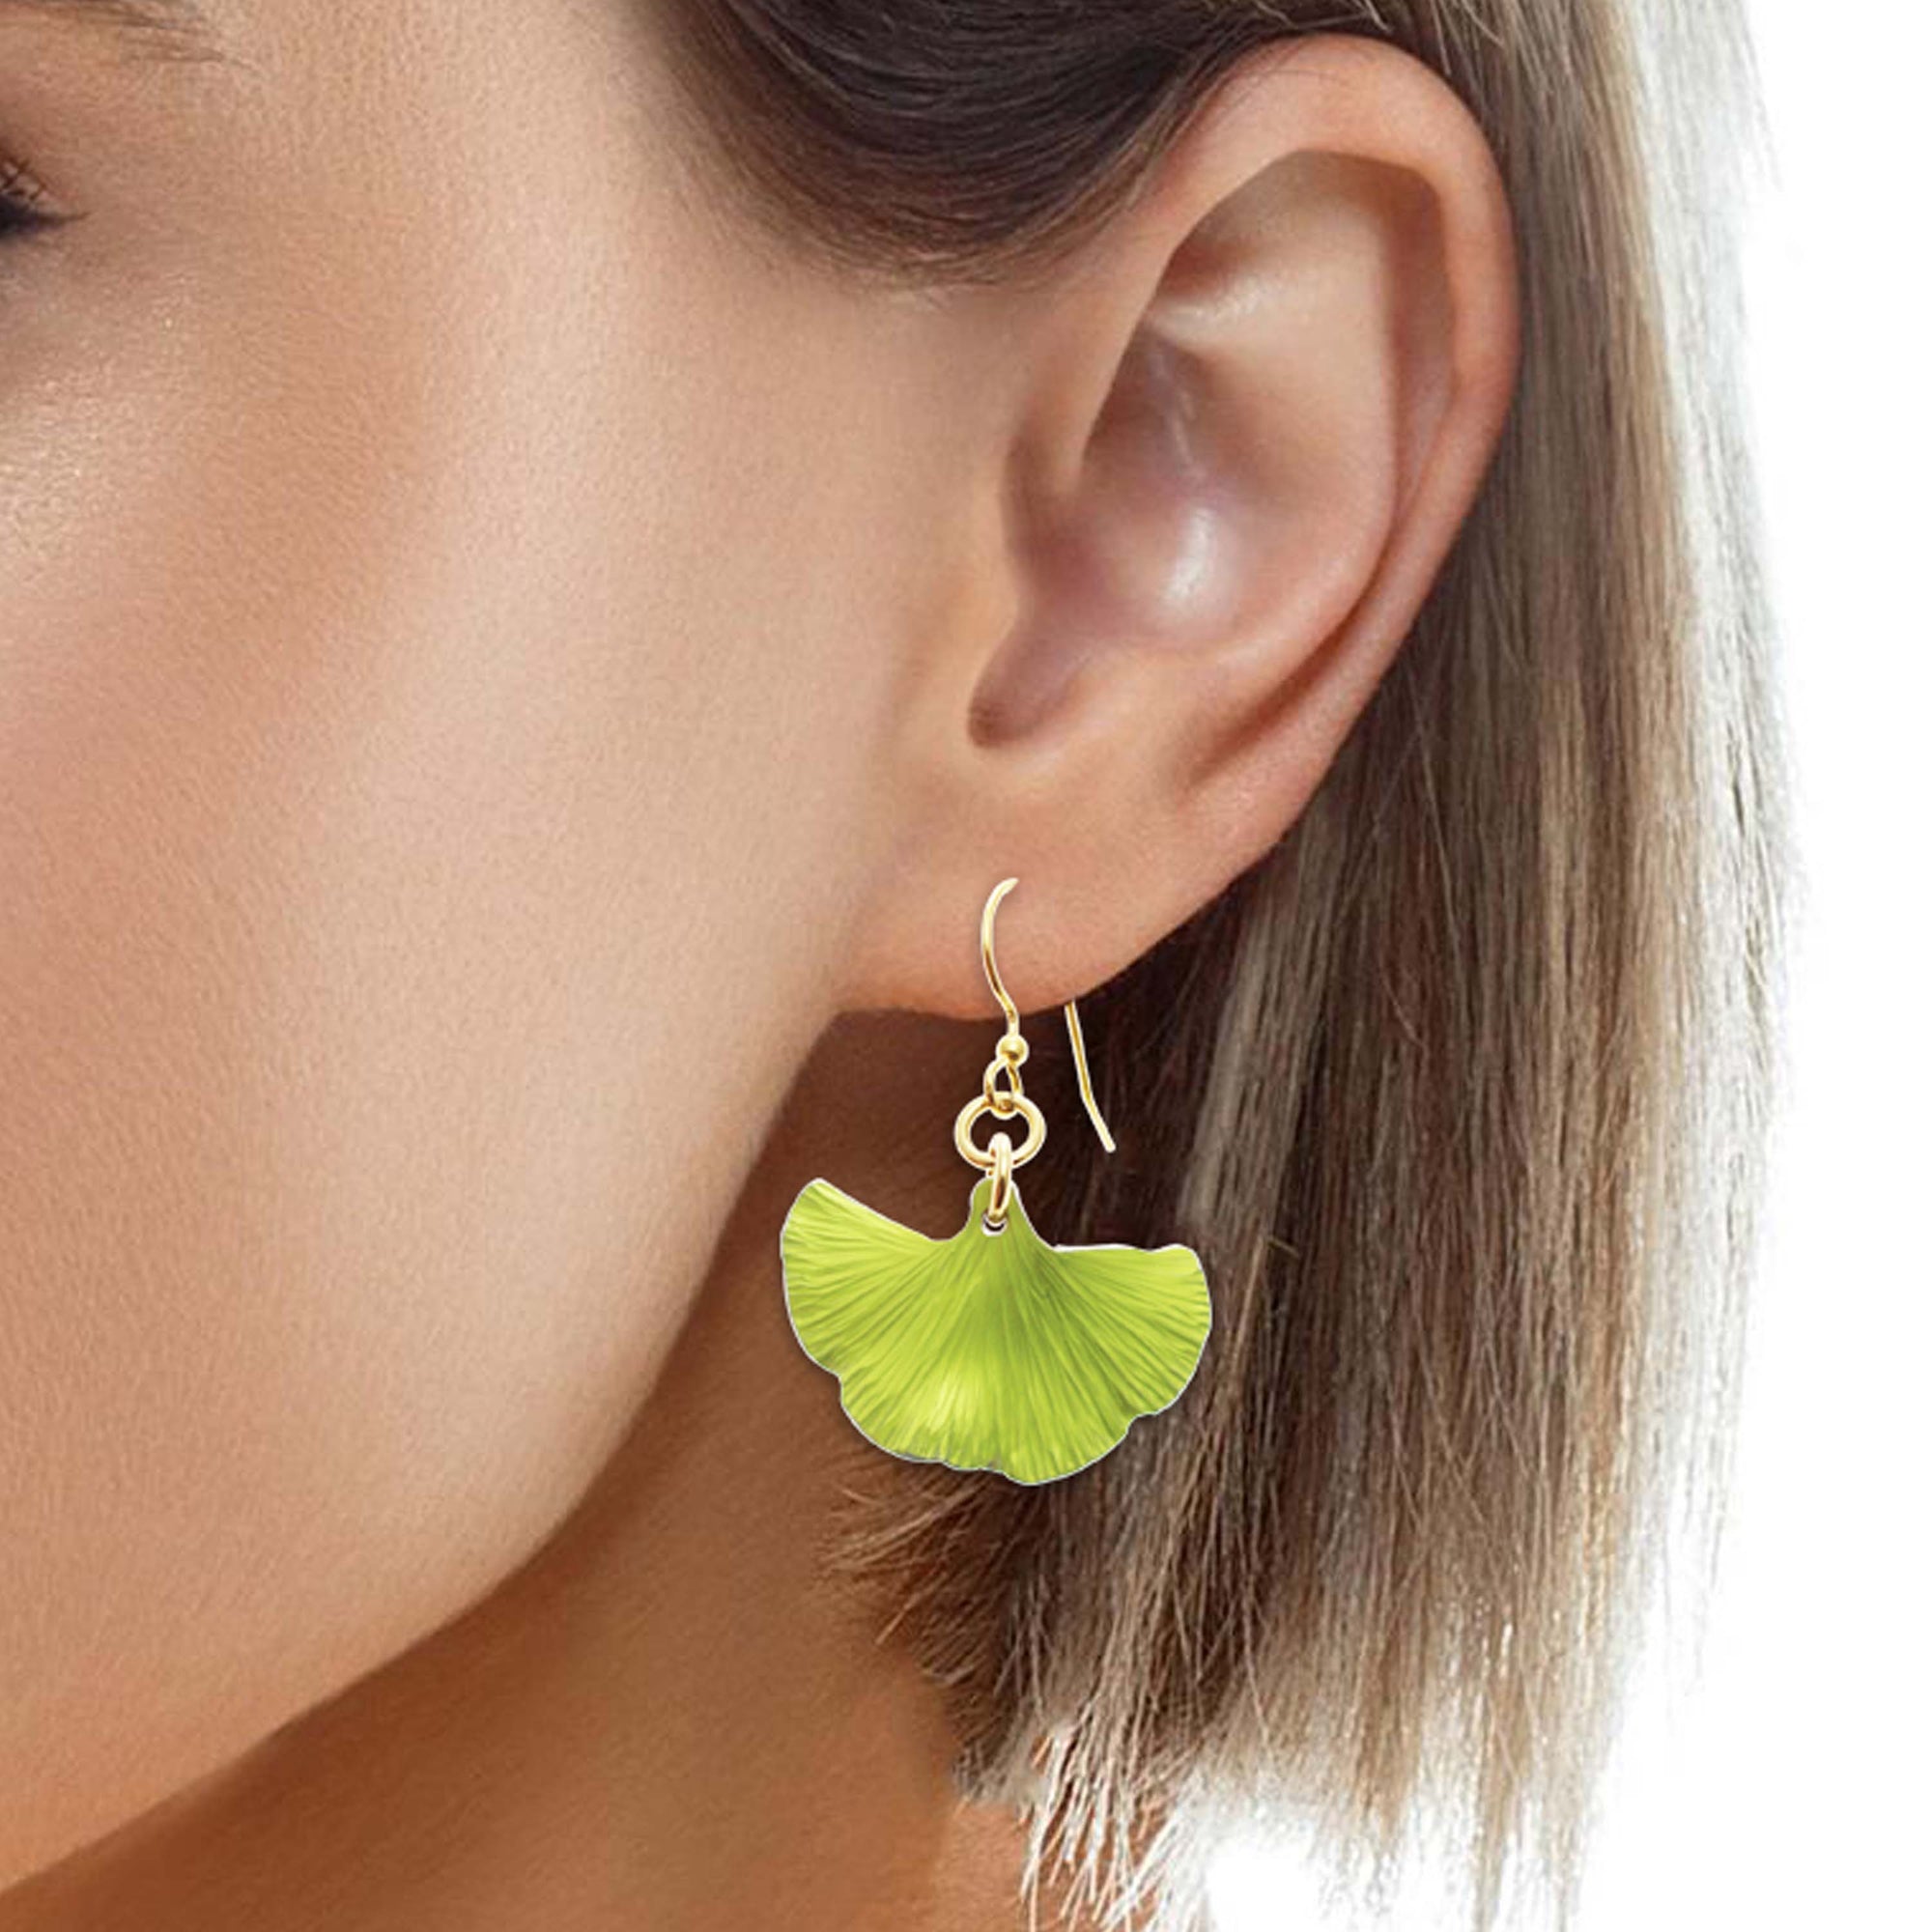 Side Profile of a Woman Wearing Small Ginkgo Leaf Anodized Aluminum Sour Candy Apple Earrings